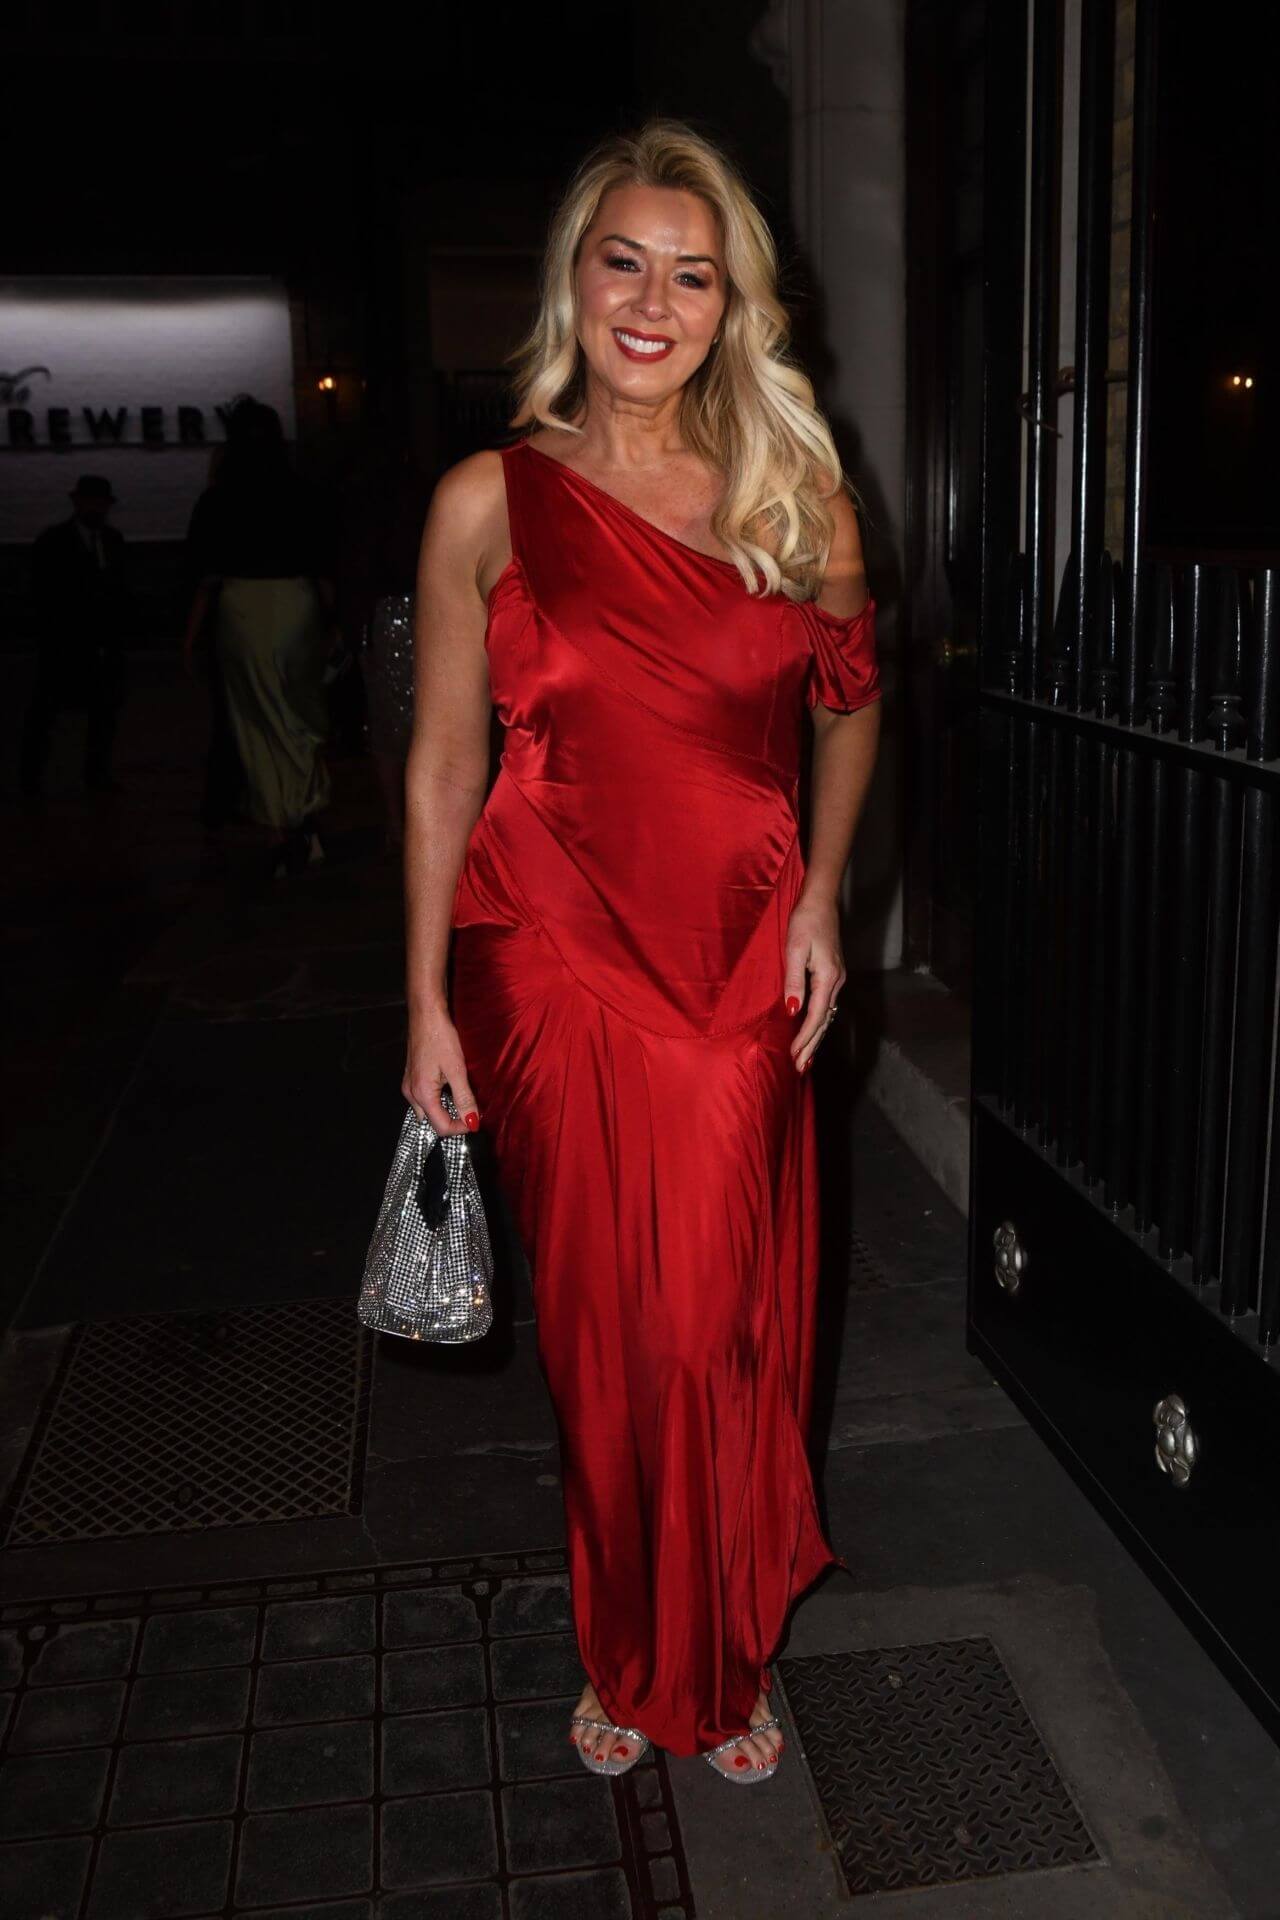 Claire Sweeney  In Shiny Red Asymmetrical Sleeves Long Dress At Together For Short Lives Ball in London